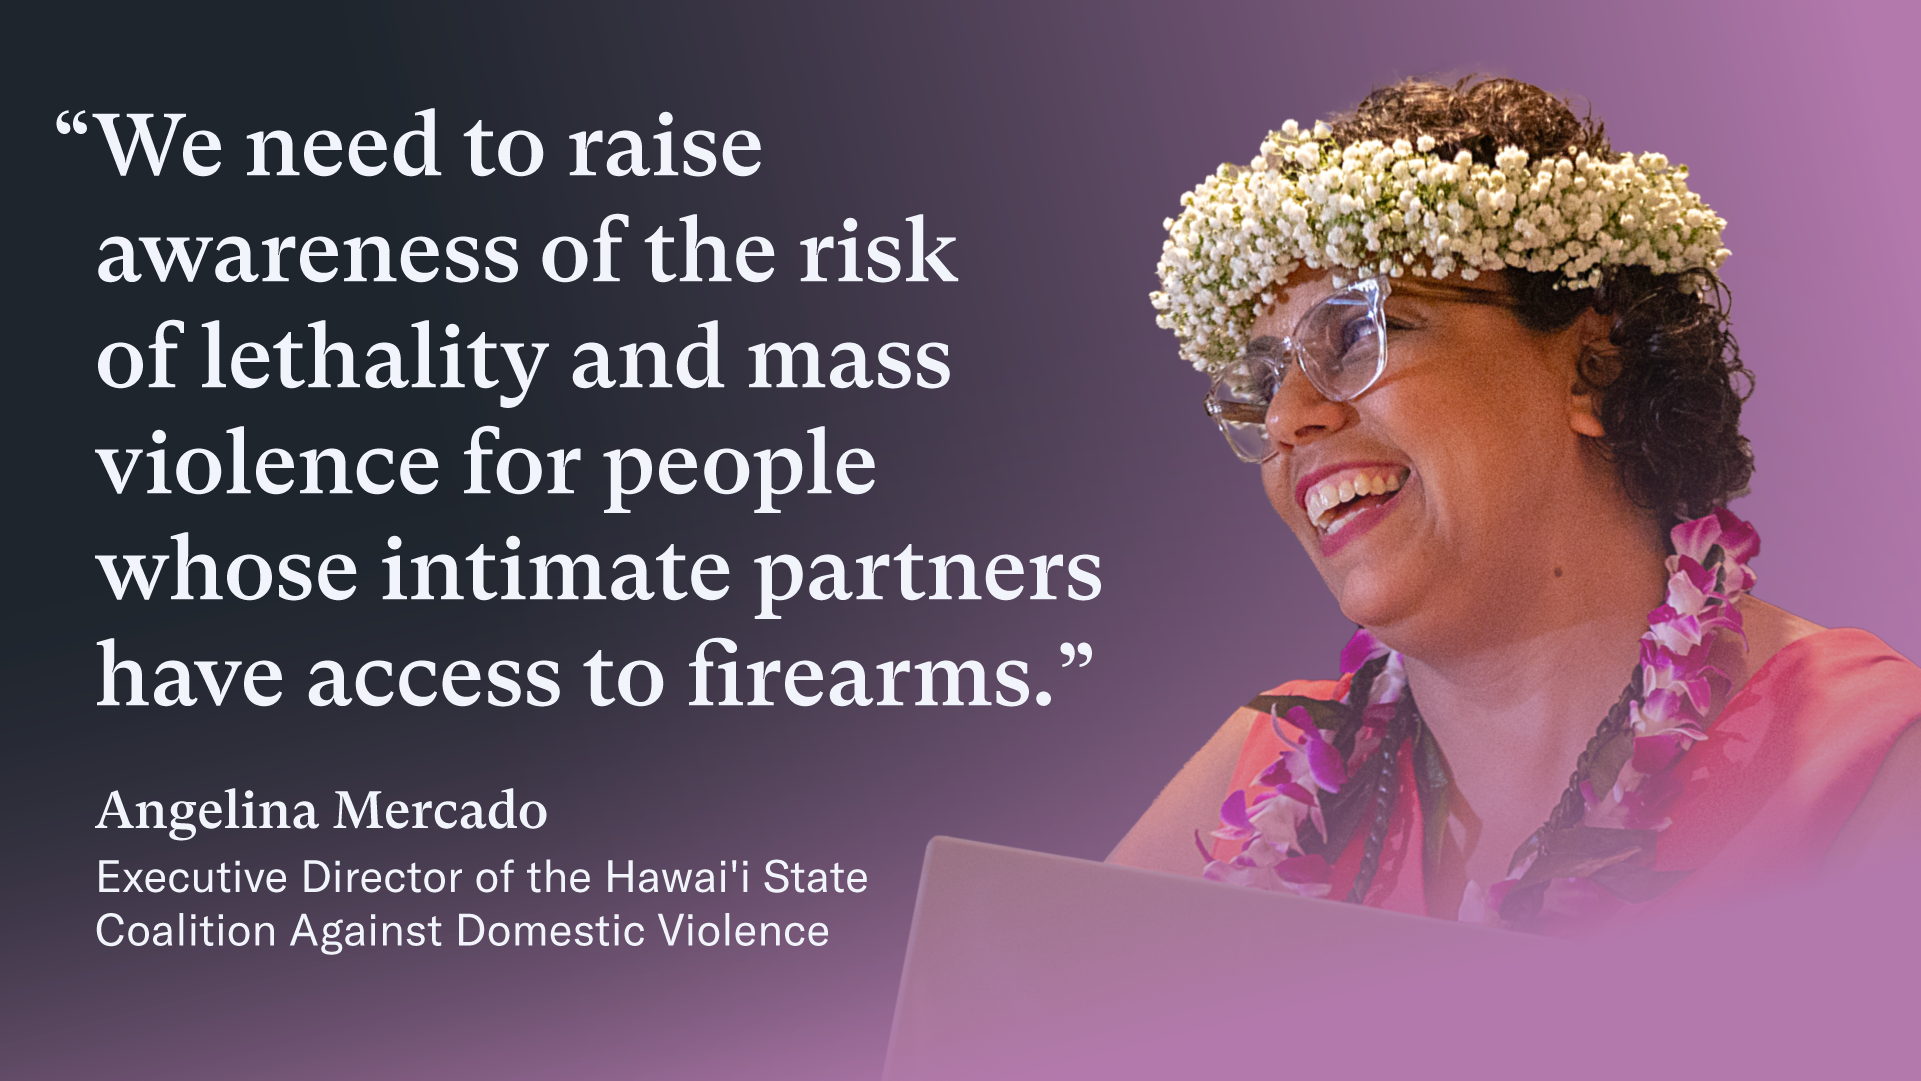 A quote graphic that has Angelina Mercado's image on the right side. Angelina has short, dark curly hair and wears a sleeveless red dress, glasses, a crown of baby's breath, and a lei with white and magenta flowers. On the left of the graphic, a quote in white text reads "We need to raise awareness of the risk of lethality and mass violence for people whose intimate partners have access to firearms." Below the quote, an attribution reads: Angelina Mercado
Executive Director of the Hawai'i State Coalition Against Domestic Violence